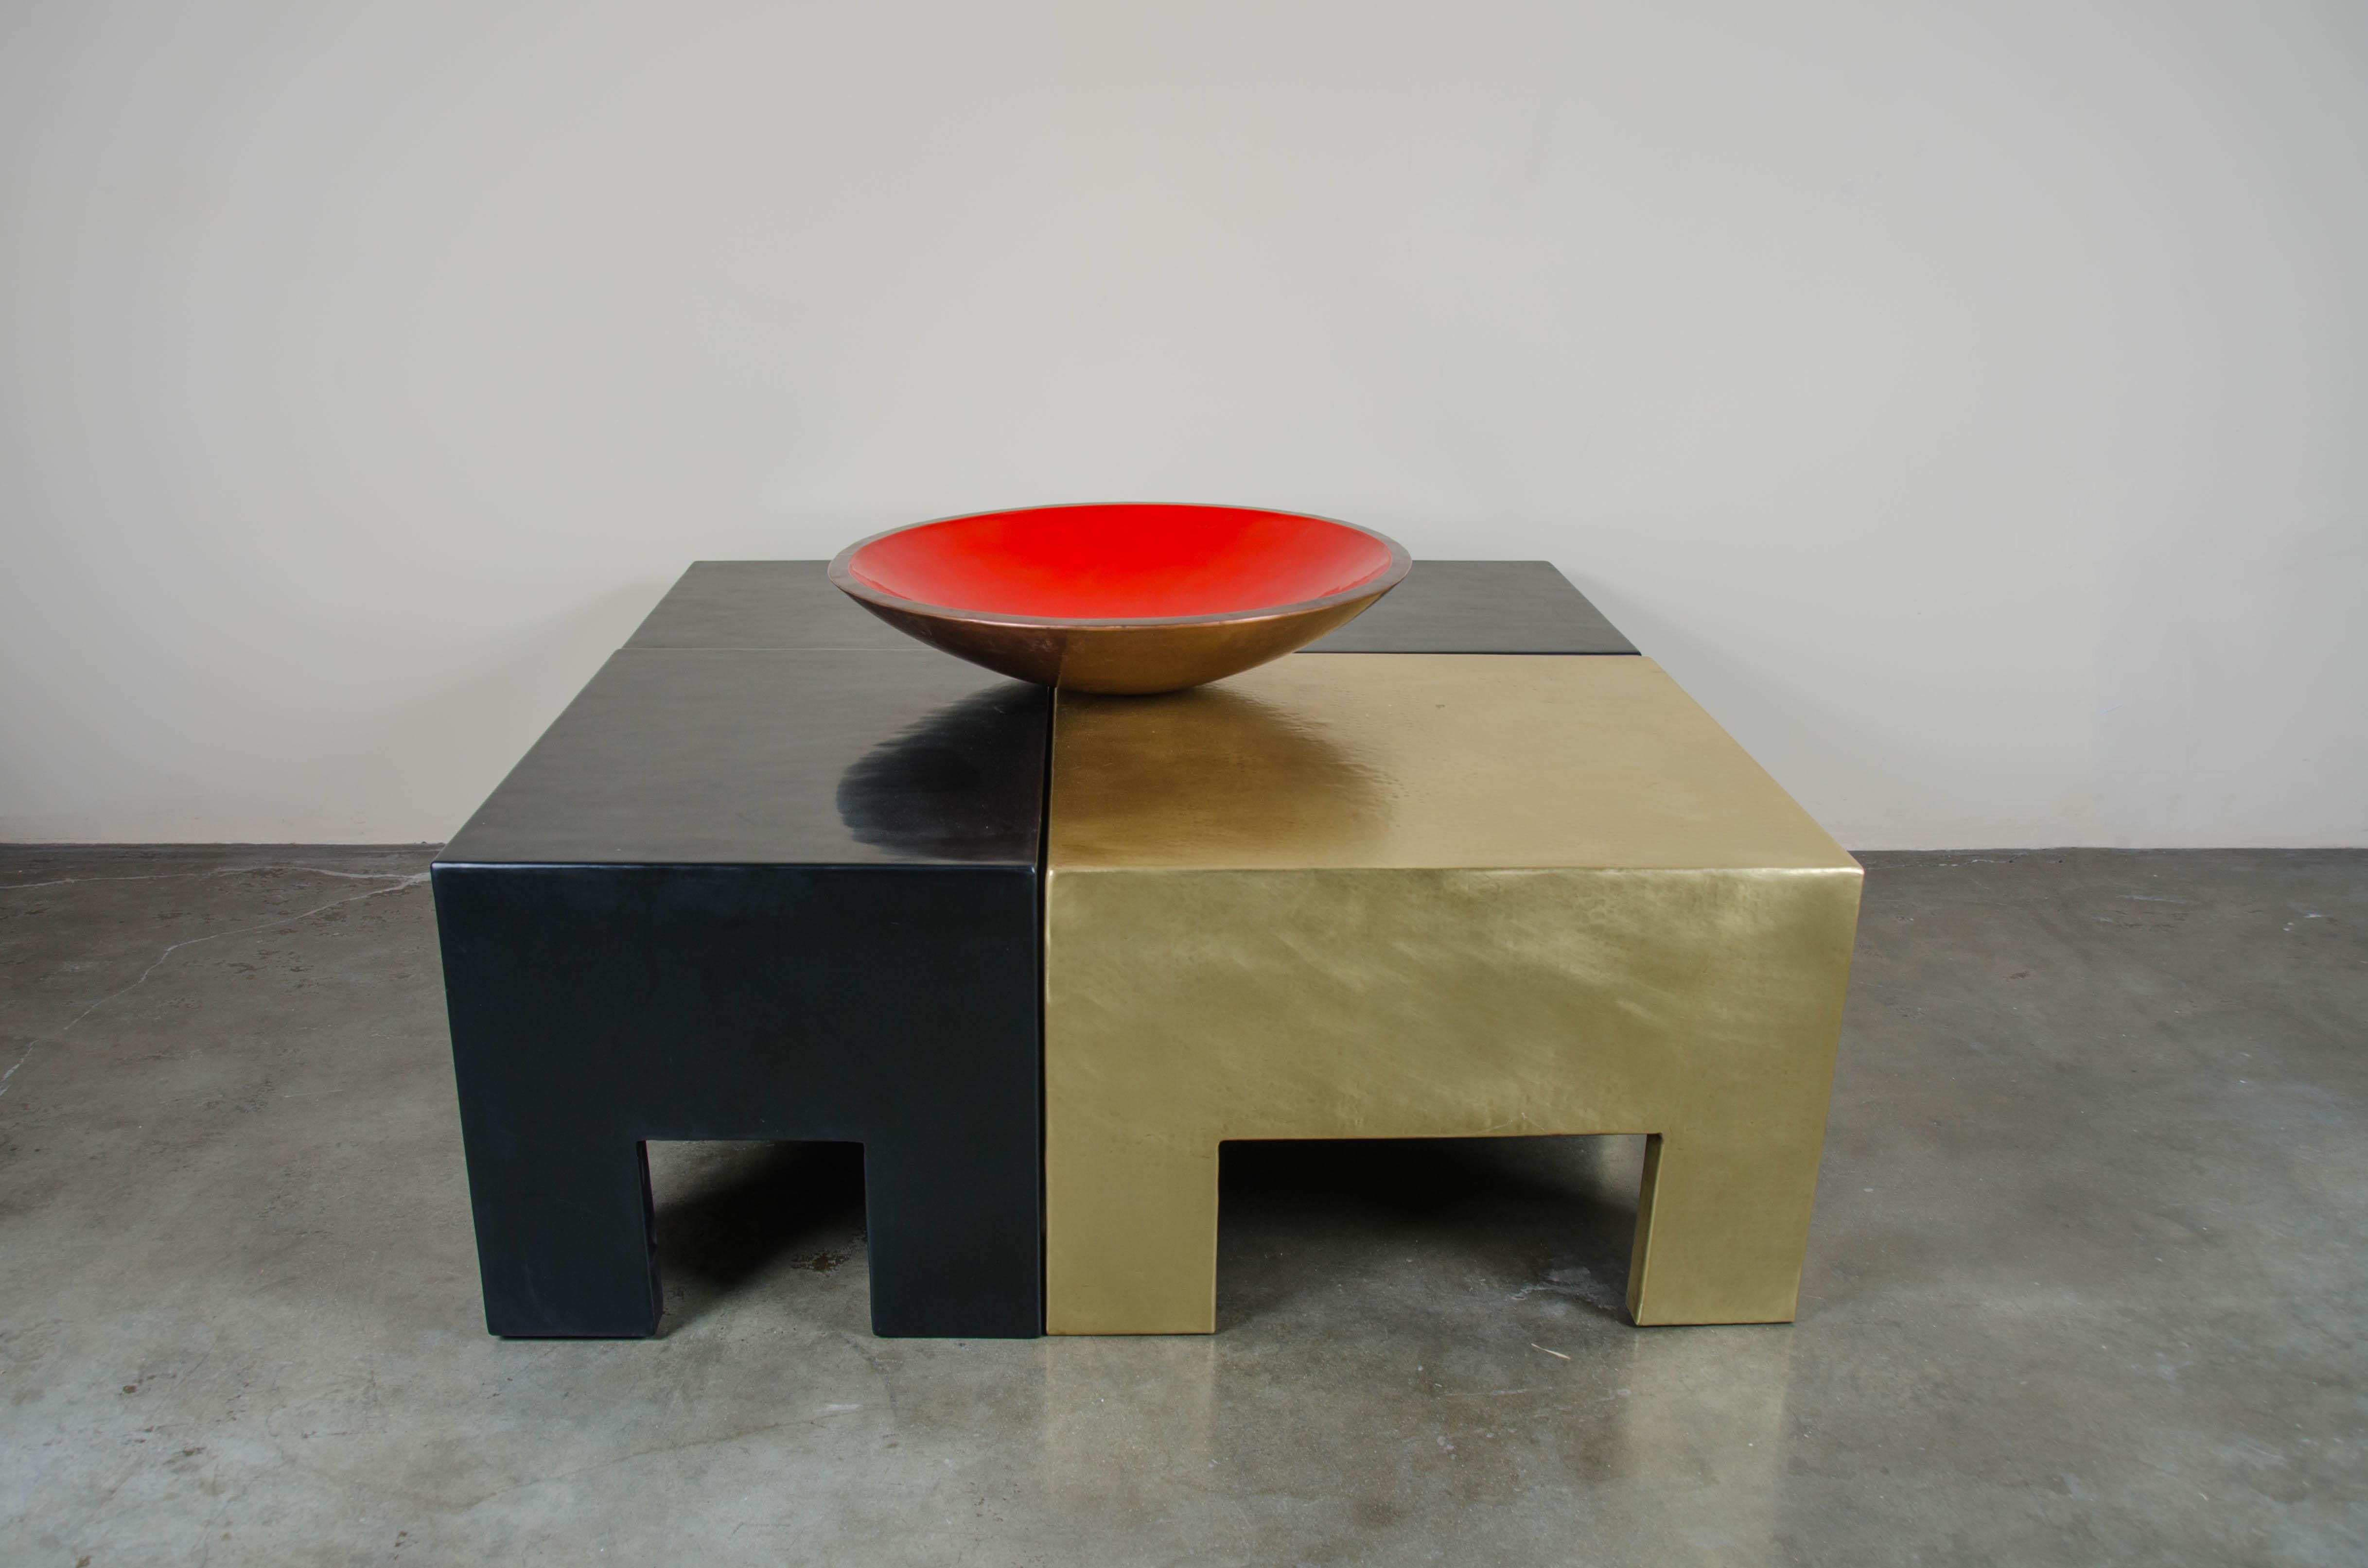 Repoussé Sectional Coffee Table, Black Lacquer and Brass by Robert Kuo, Limited Edition